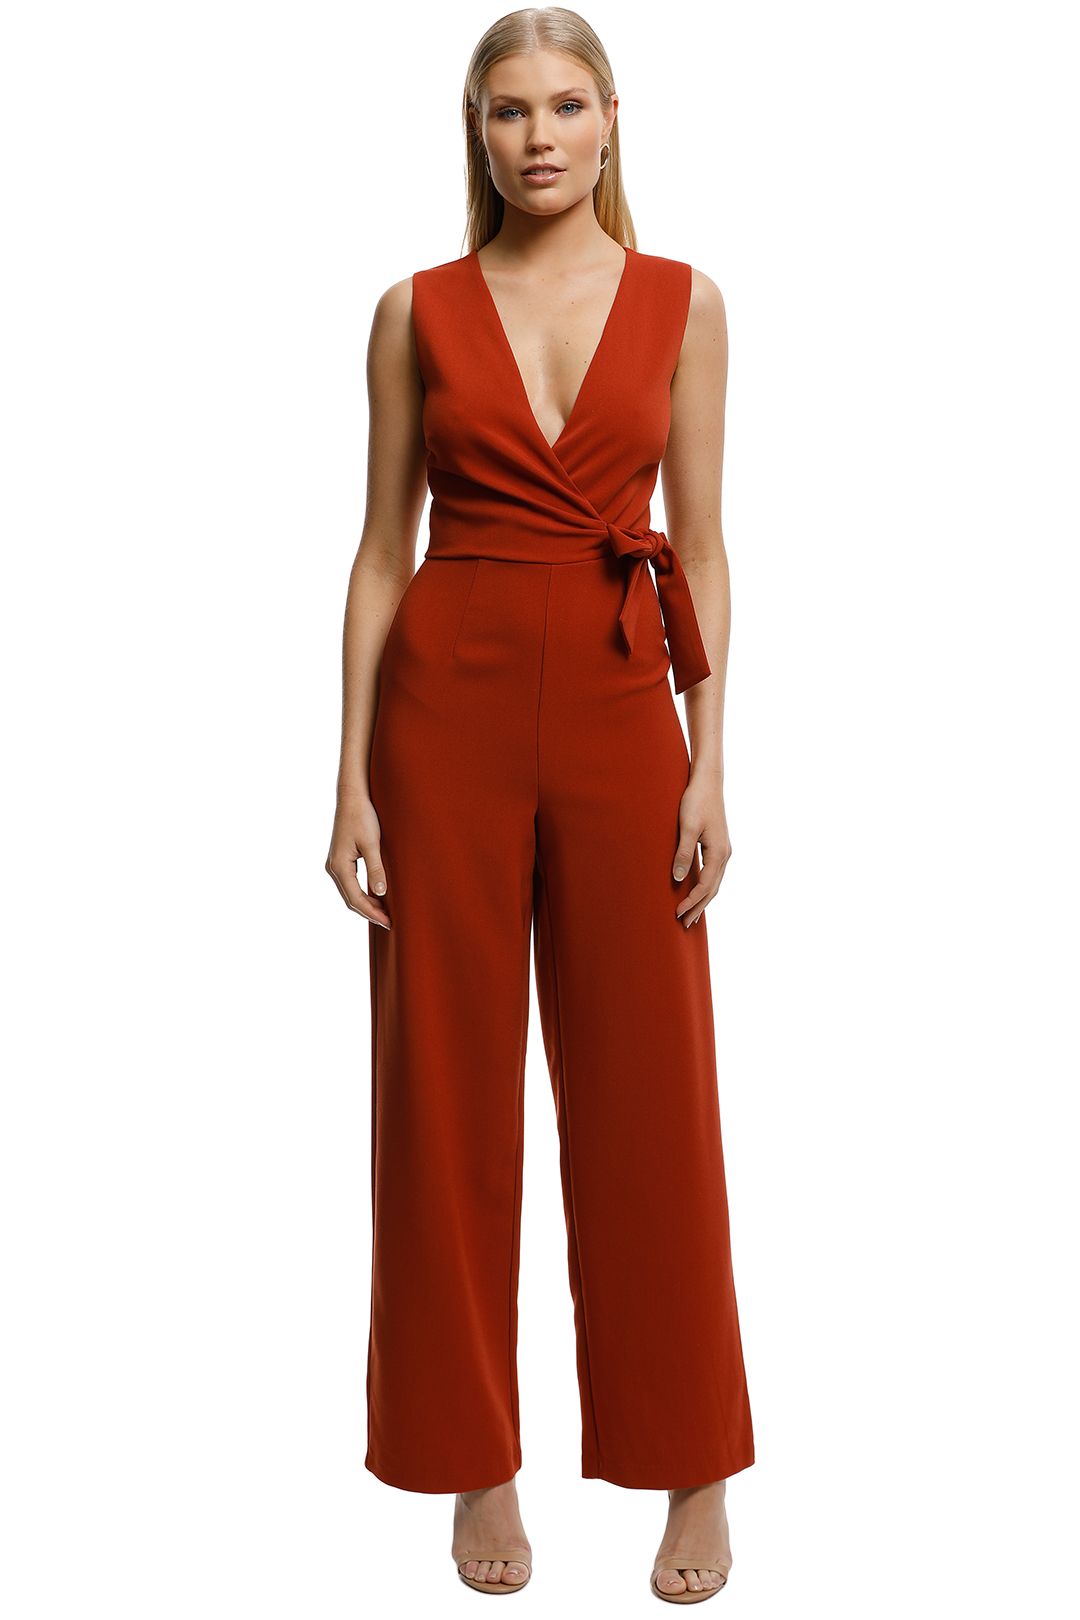 WISH-Moments-Jumpsuit-Rust-Front